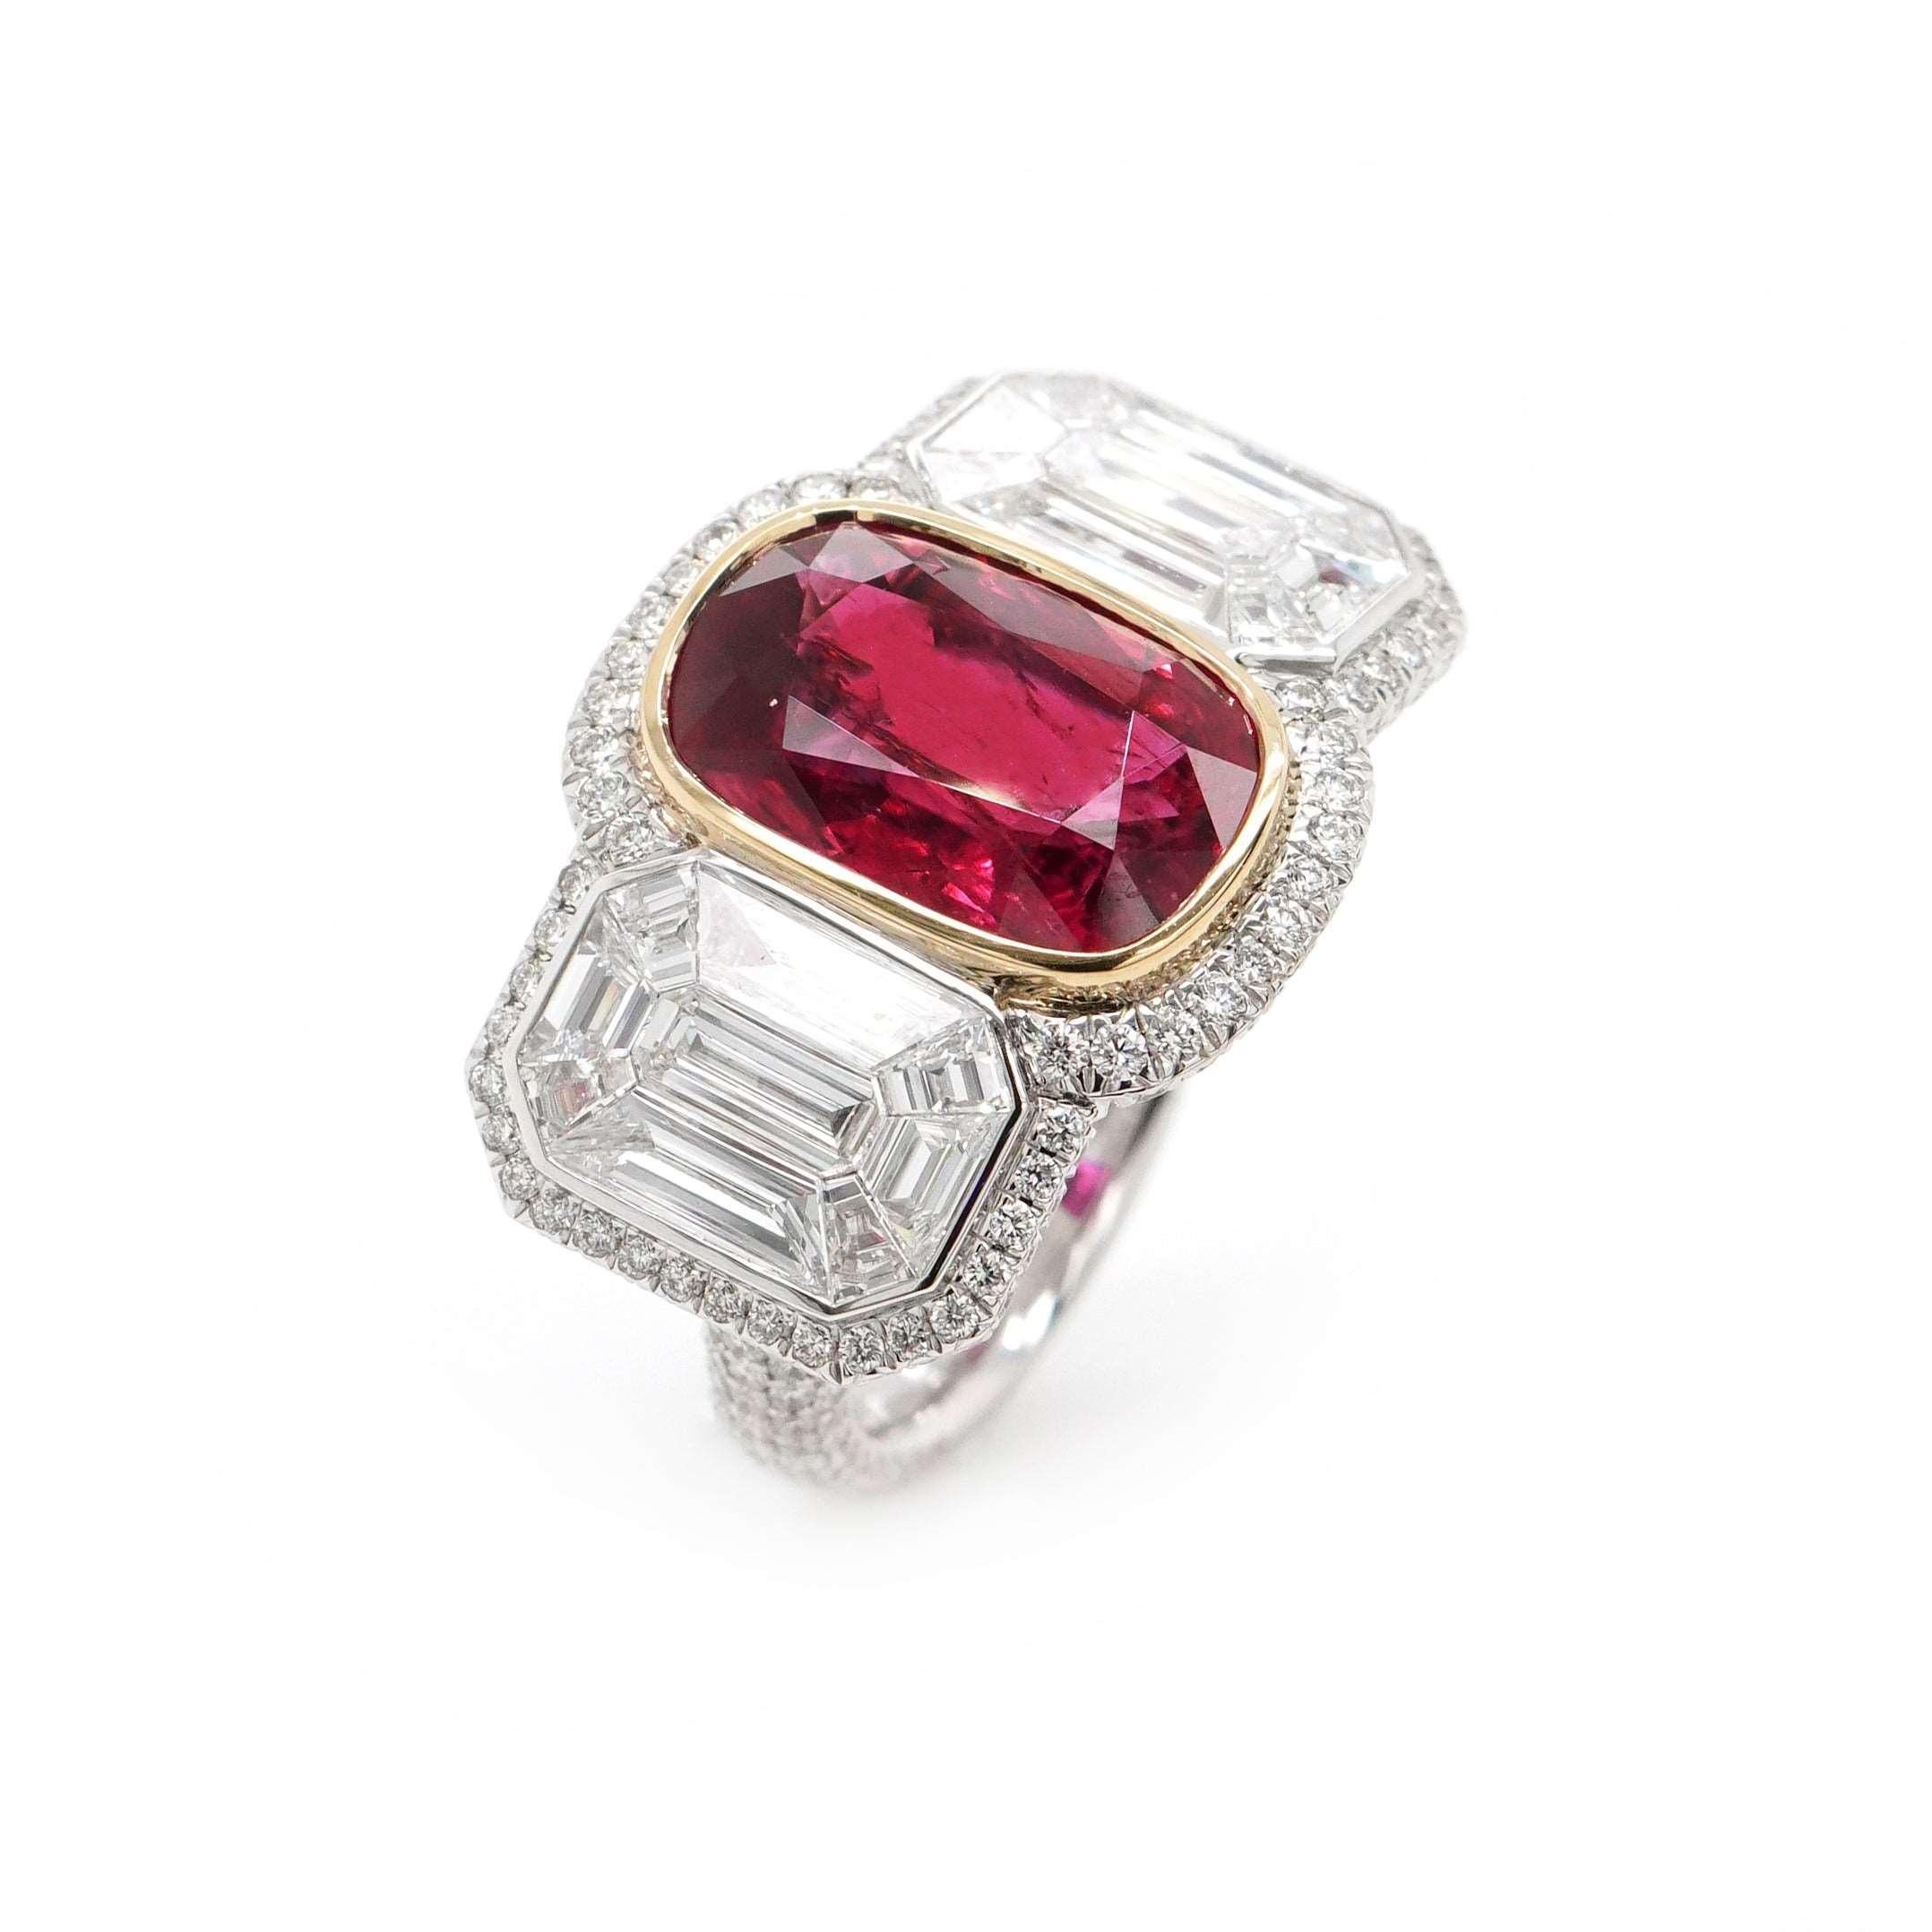 Cushion Cut BENJAMIN FINE JEWELRY 5.37 cts Siam Ruby with Pie Cut Diamond 18K Ring For Sale